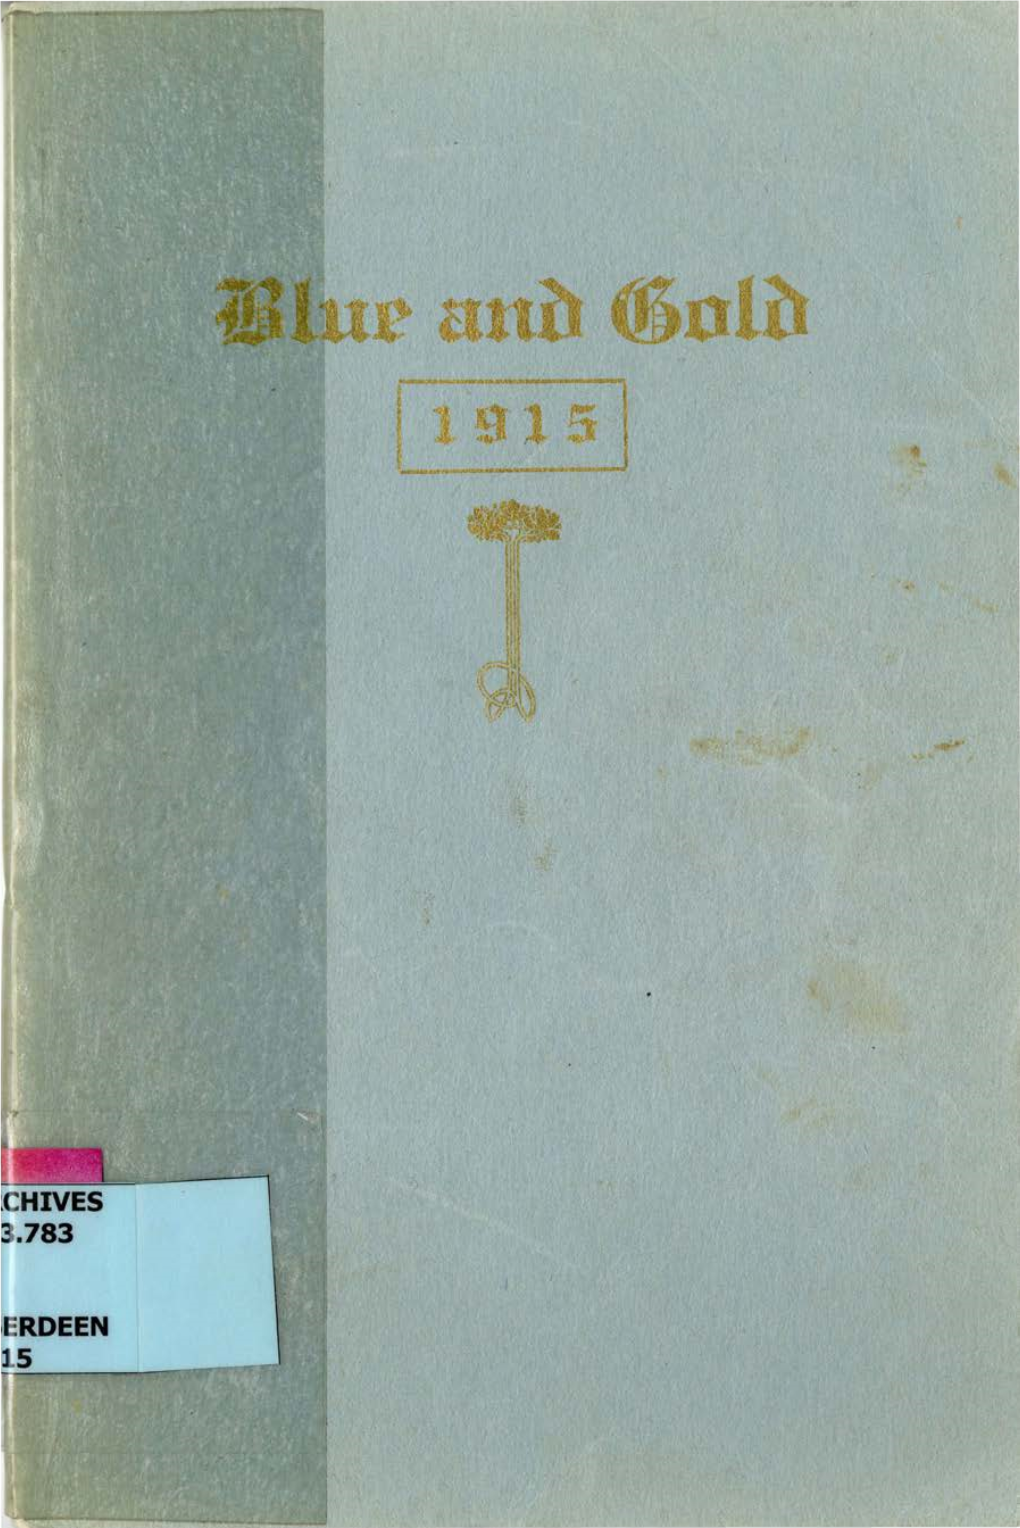 Blue and Gold 1915 Optimized.Pdf